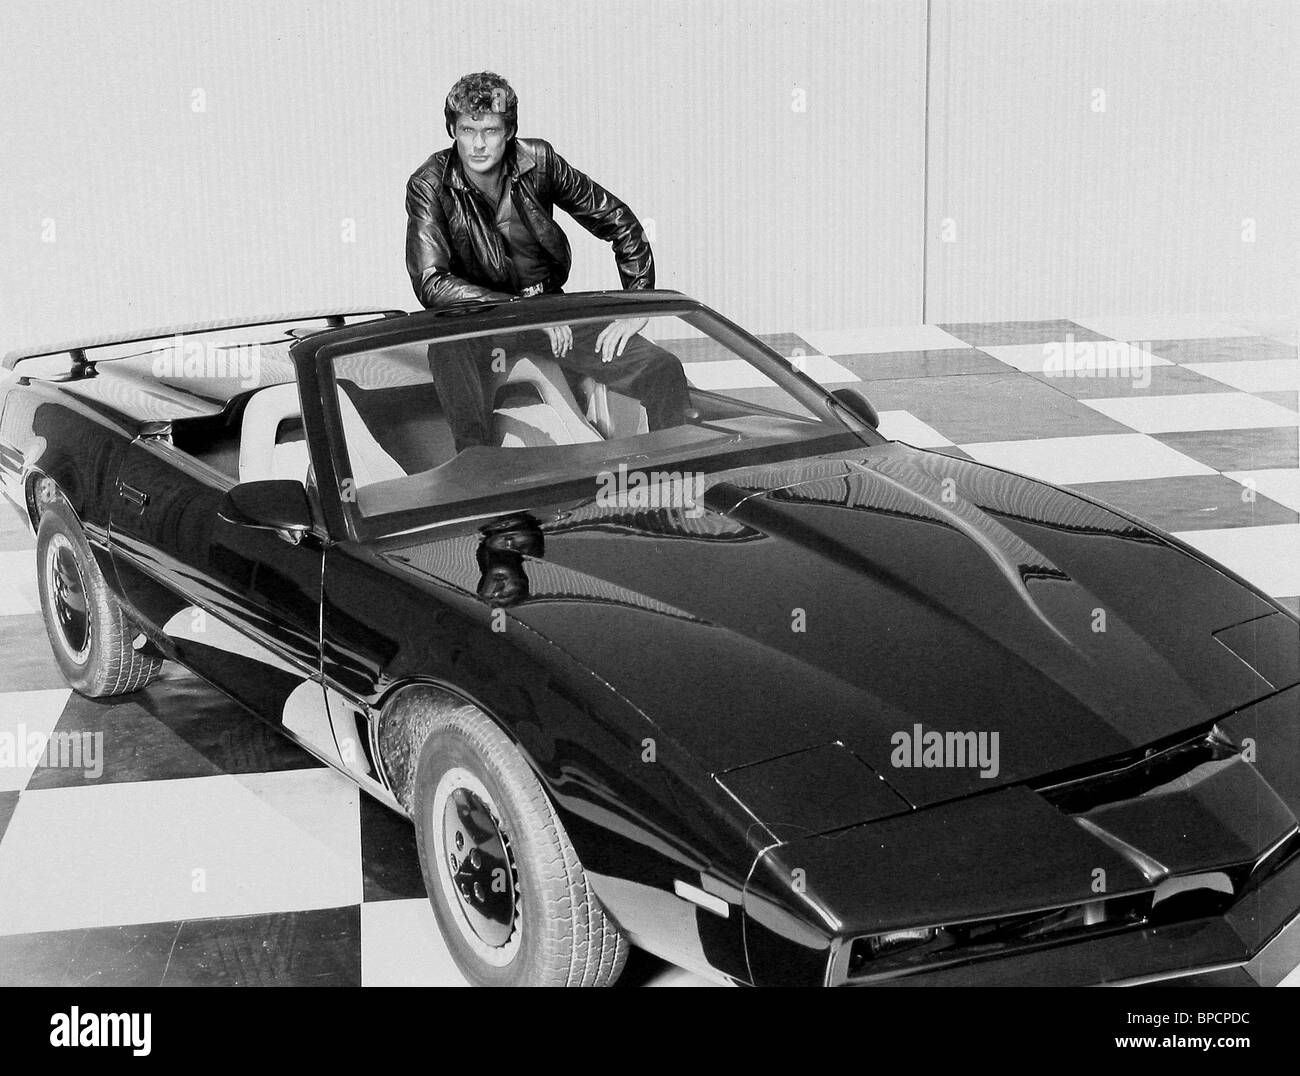 pictures of kitt from knight rider